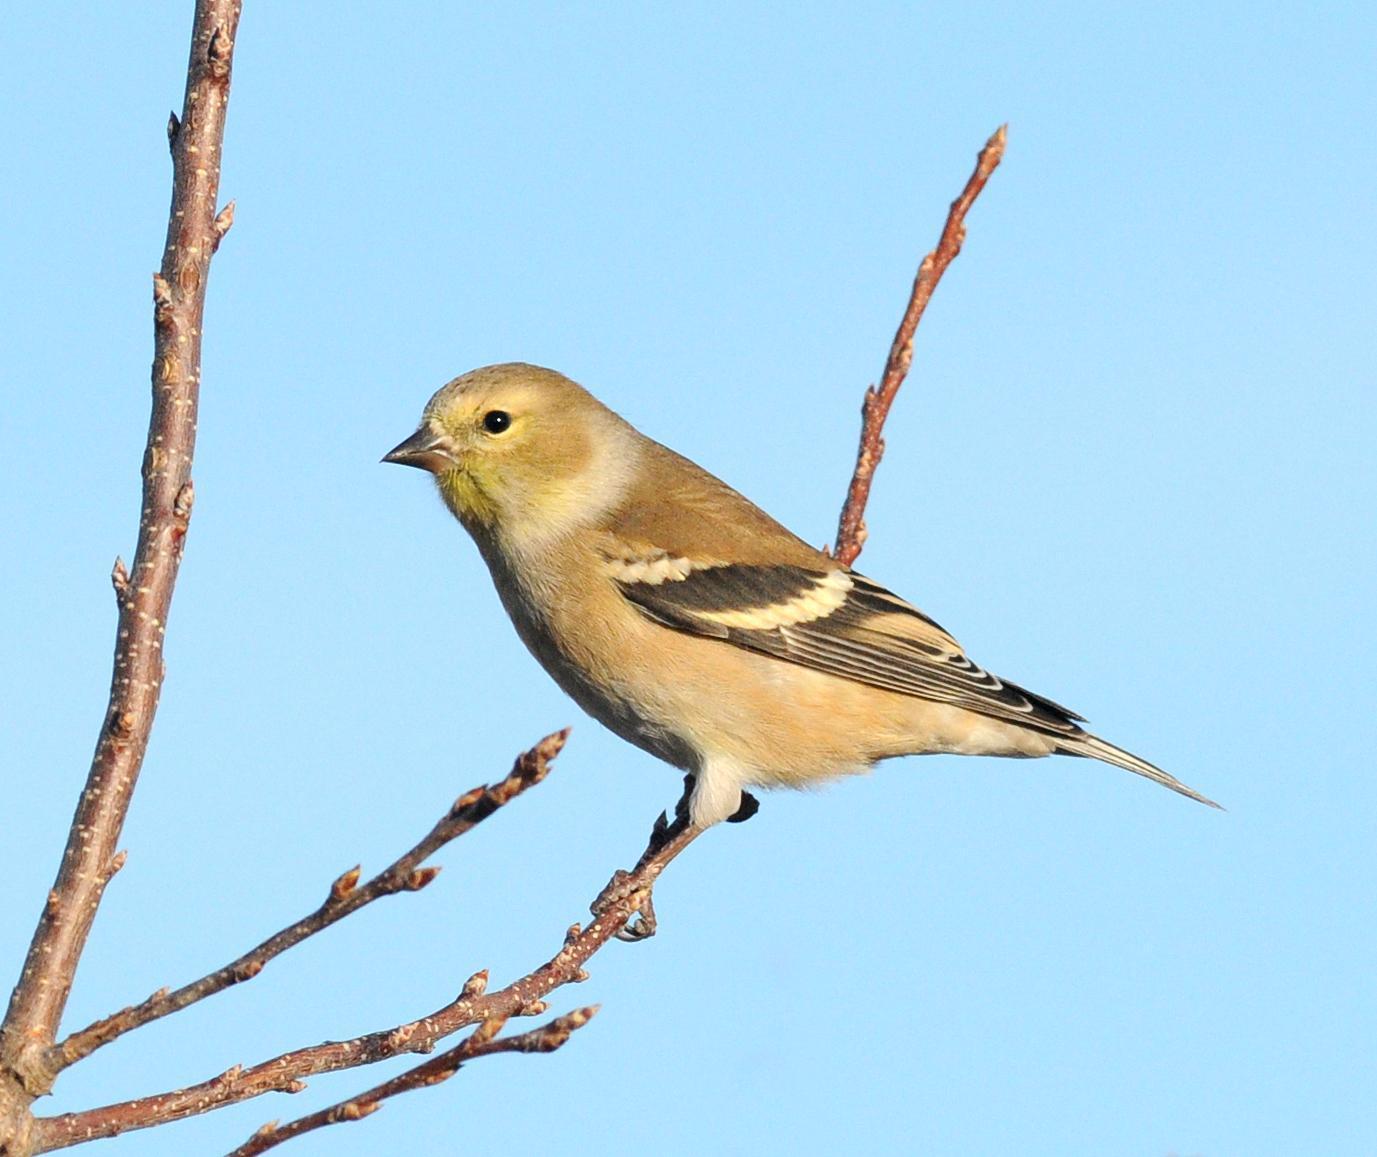 American Goldfinch Photo by Steven Mlodinow